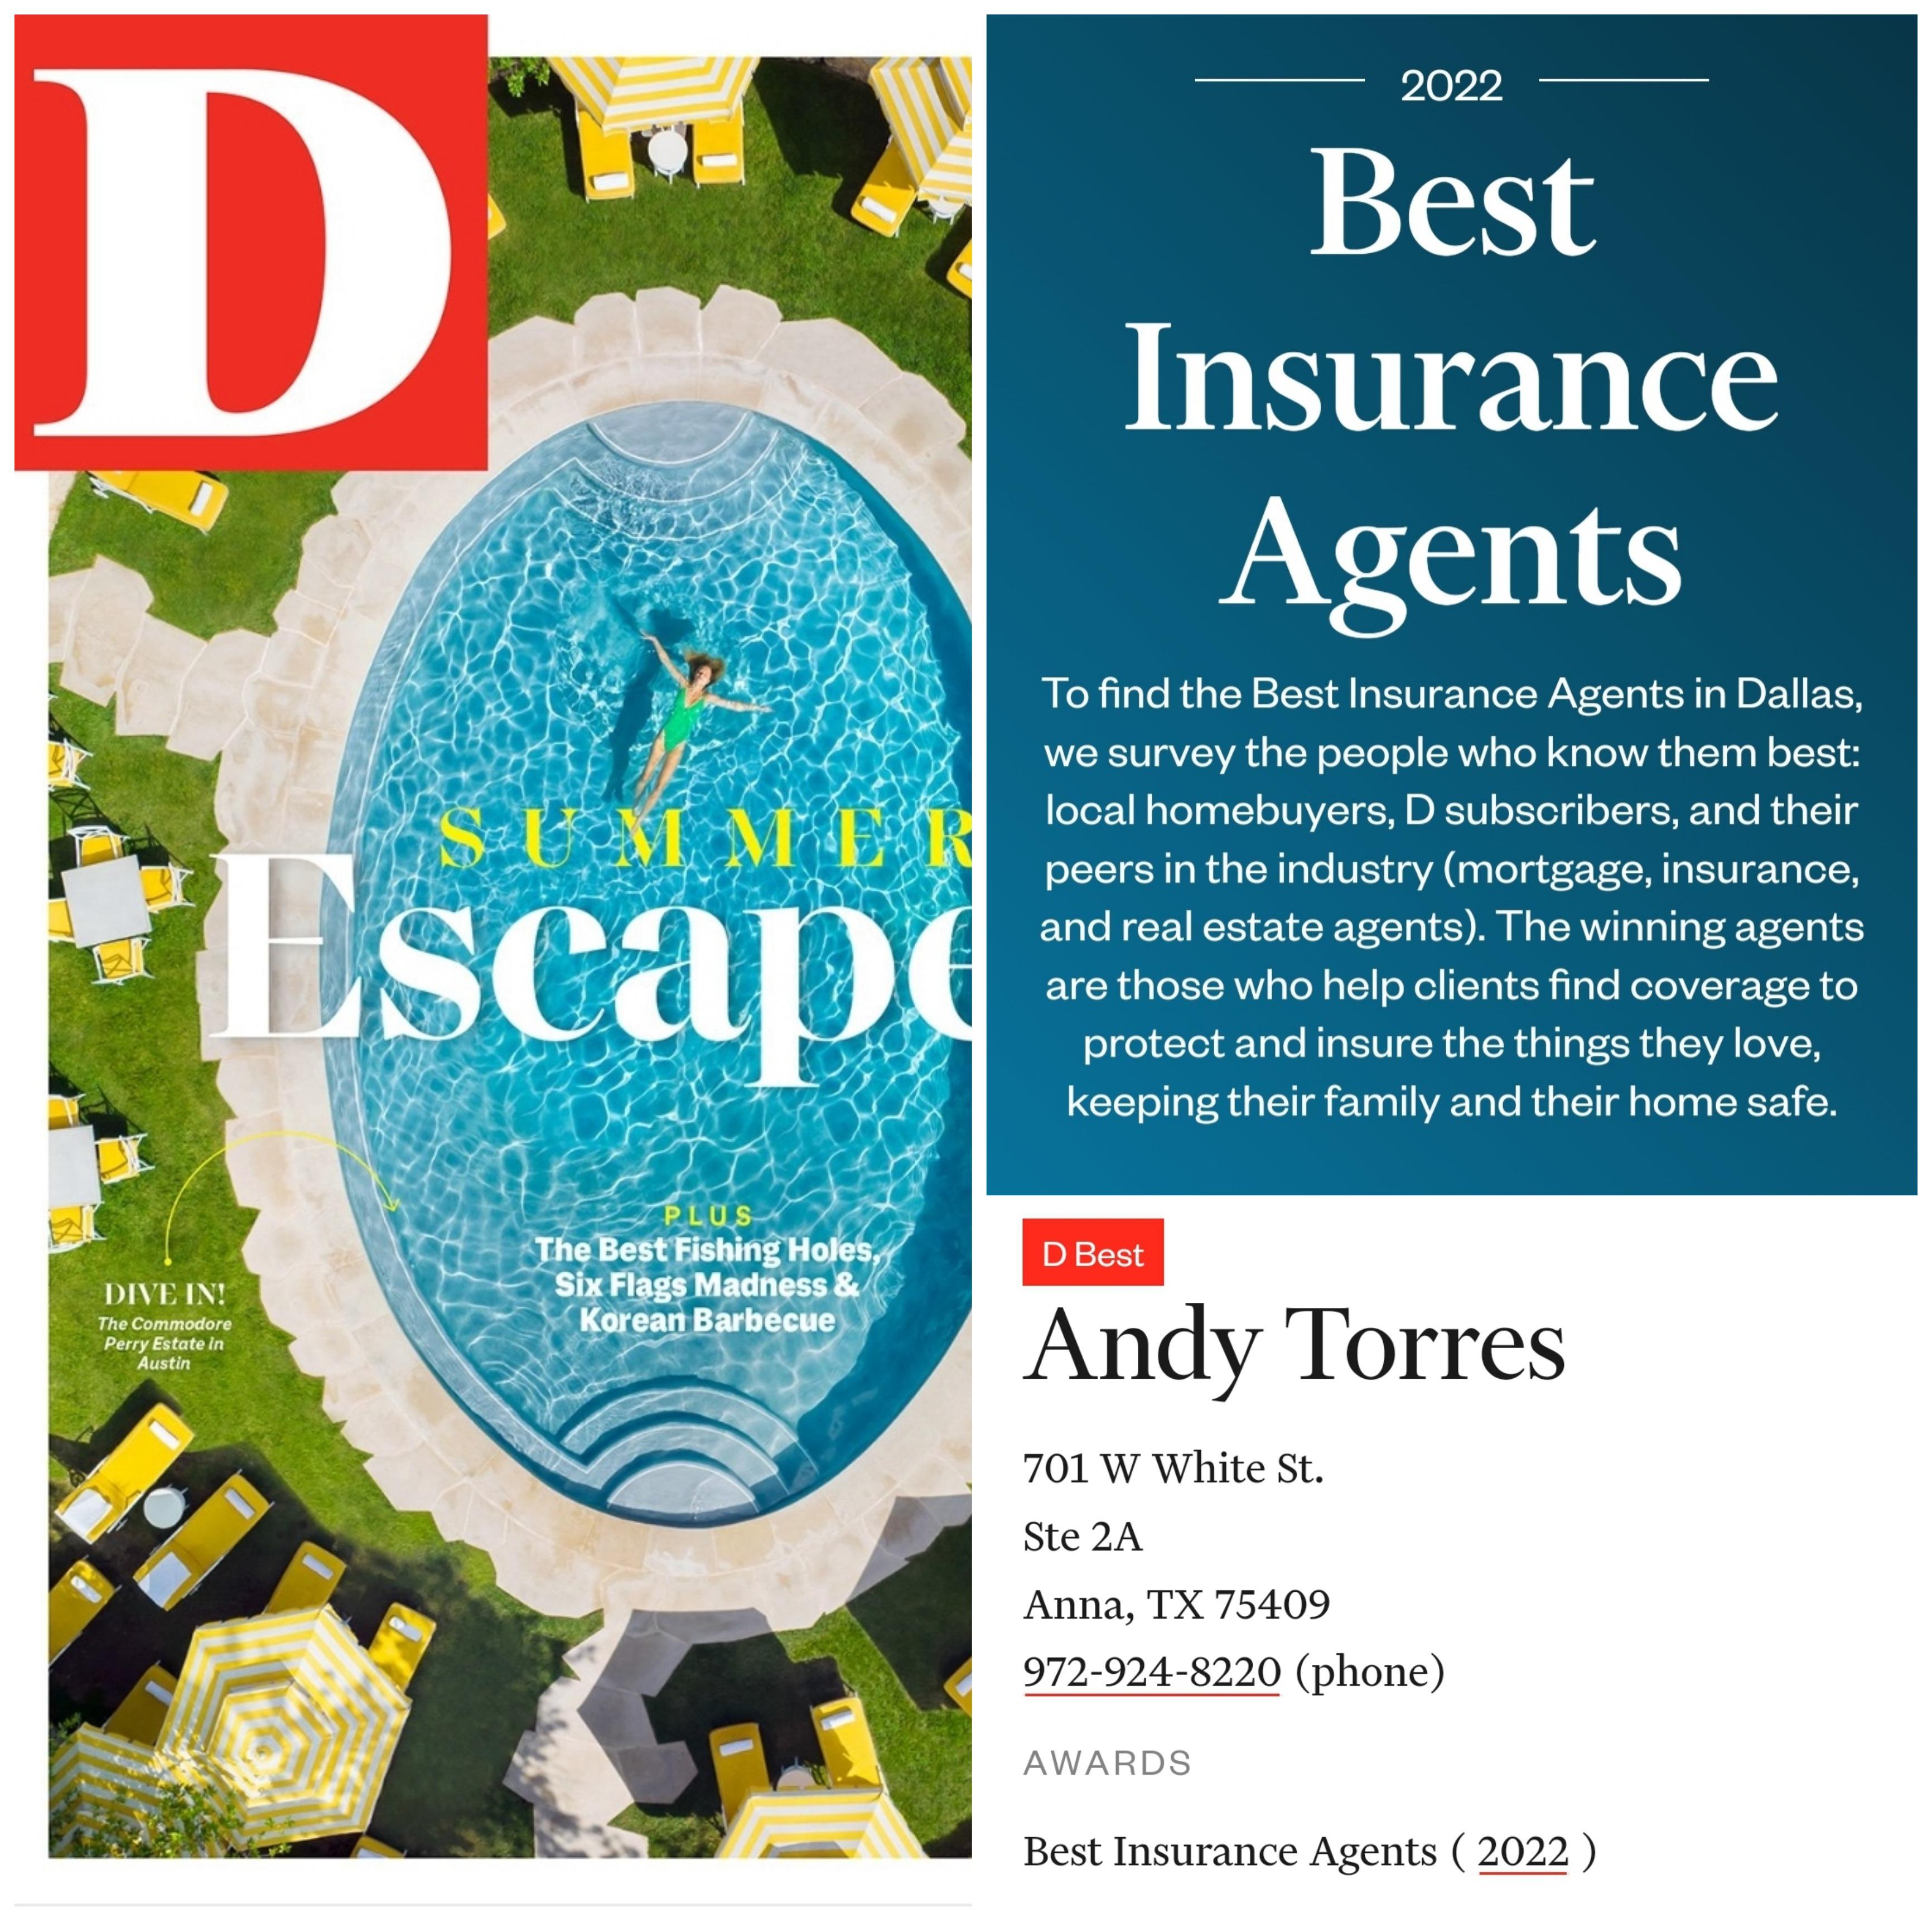 We're honored to have been nominated and selected as part of D Magazines Best Insurance Agents for 2022! You'll see us in the July issue, now out on newsstands. We wouldn't be here without our great team and wonderful customers. Thank you! We'll continue to work hard to be deserving of this honor.